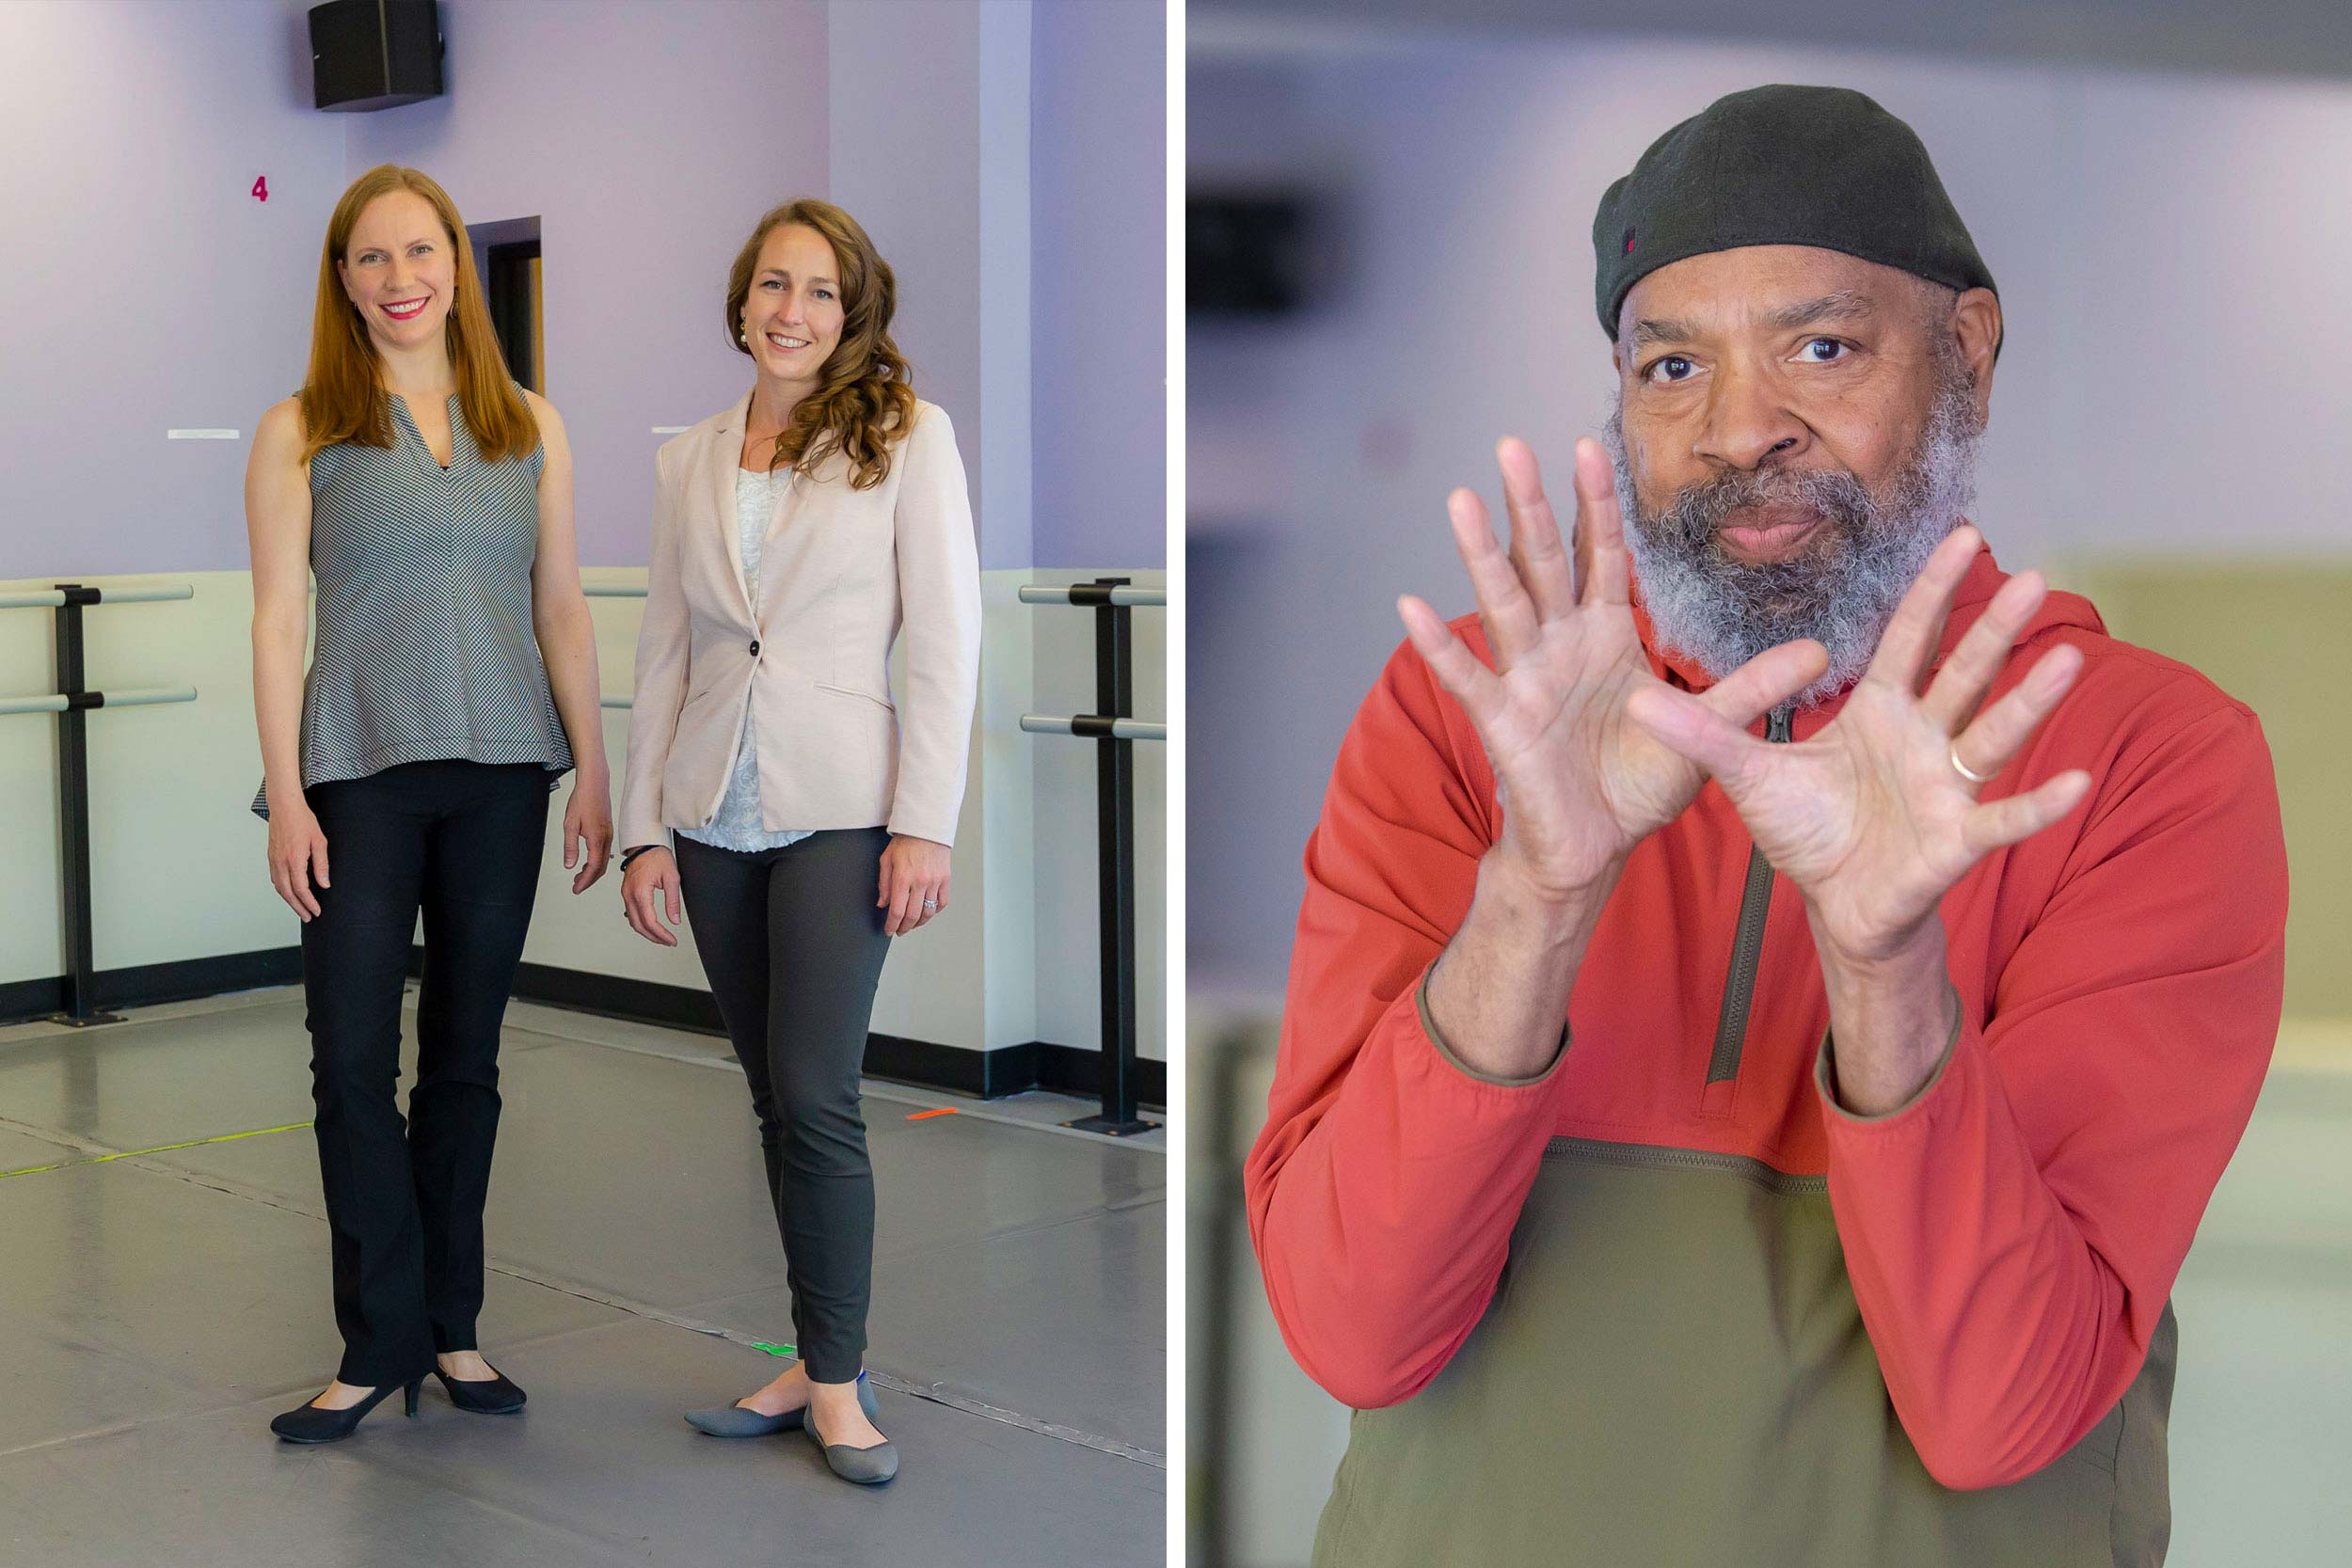 Sara Clayborne and Emily Hartka stand together in the ballet studio and smile at the camera. Keith Lee poses with his hands outstretched.